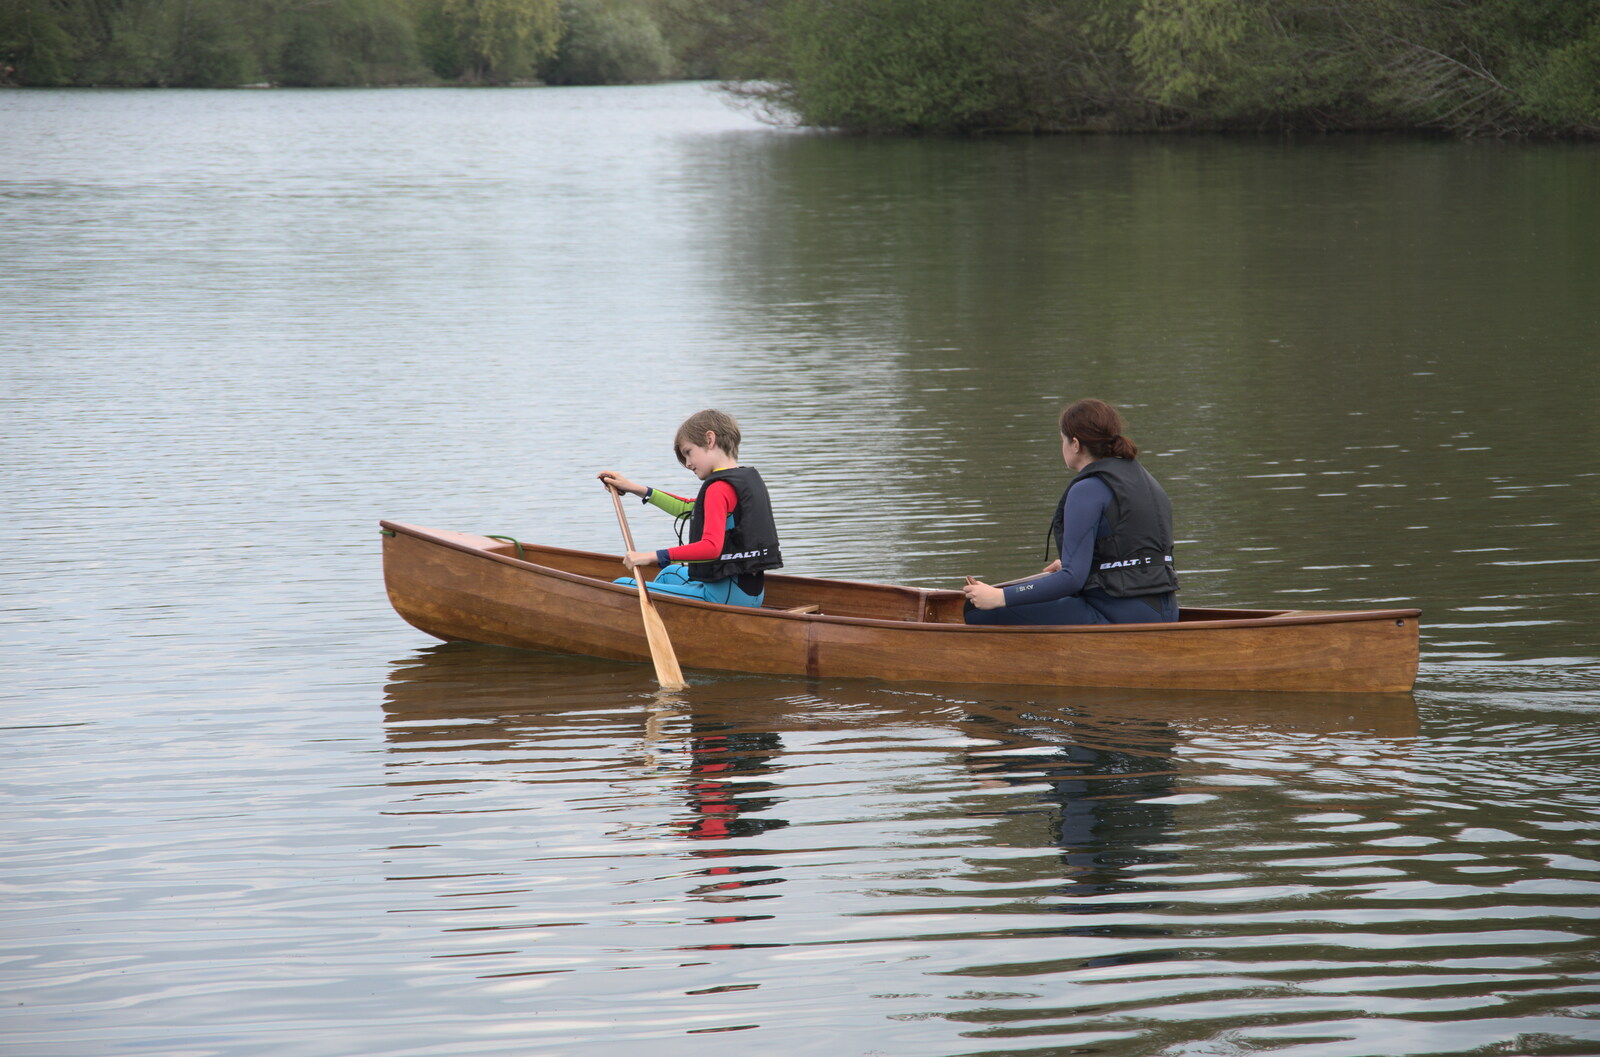 The Canoe's First Outing, Weybread Lake, Harleston - 1st May 2022: Harry gets a go with some gentle paddling